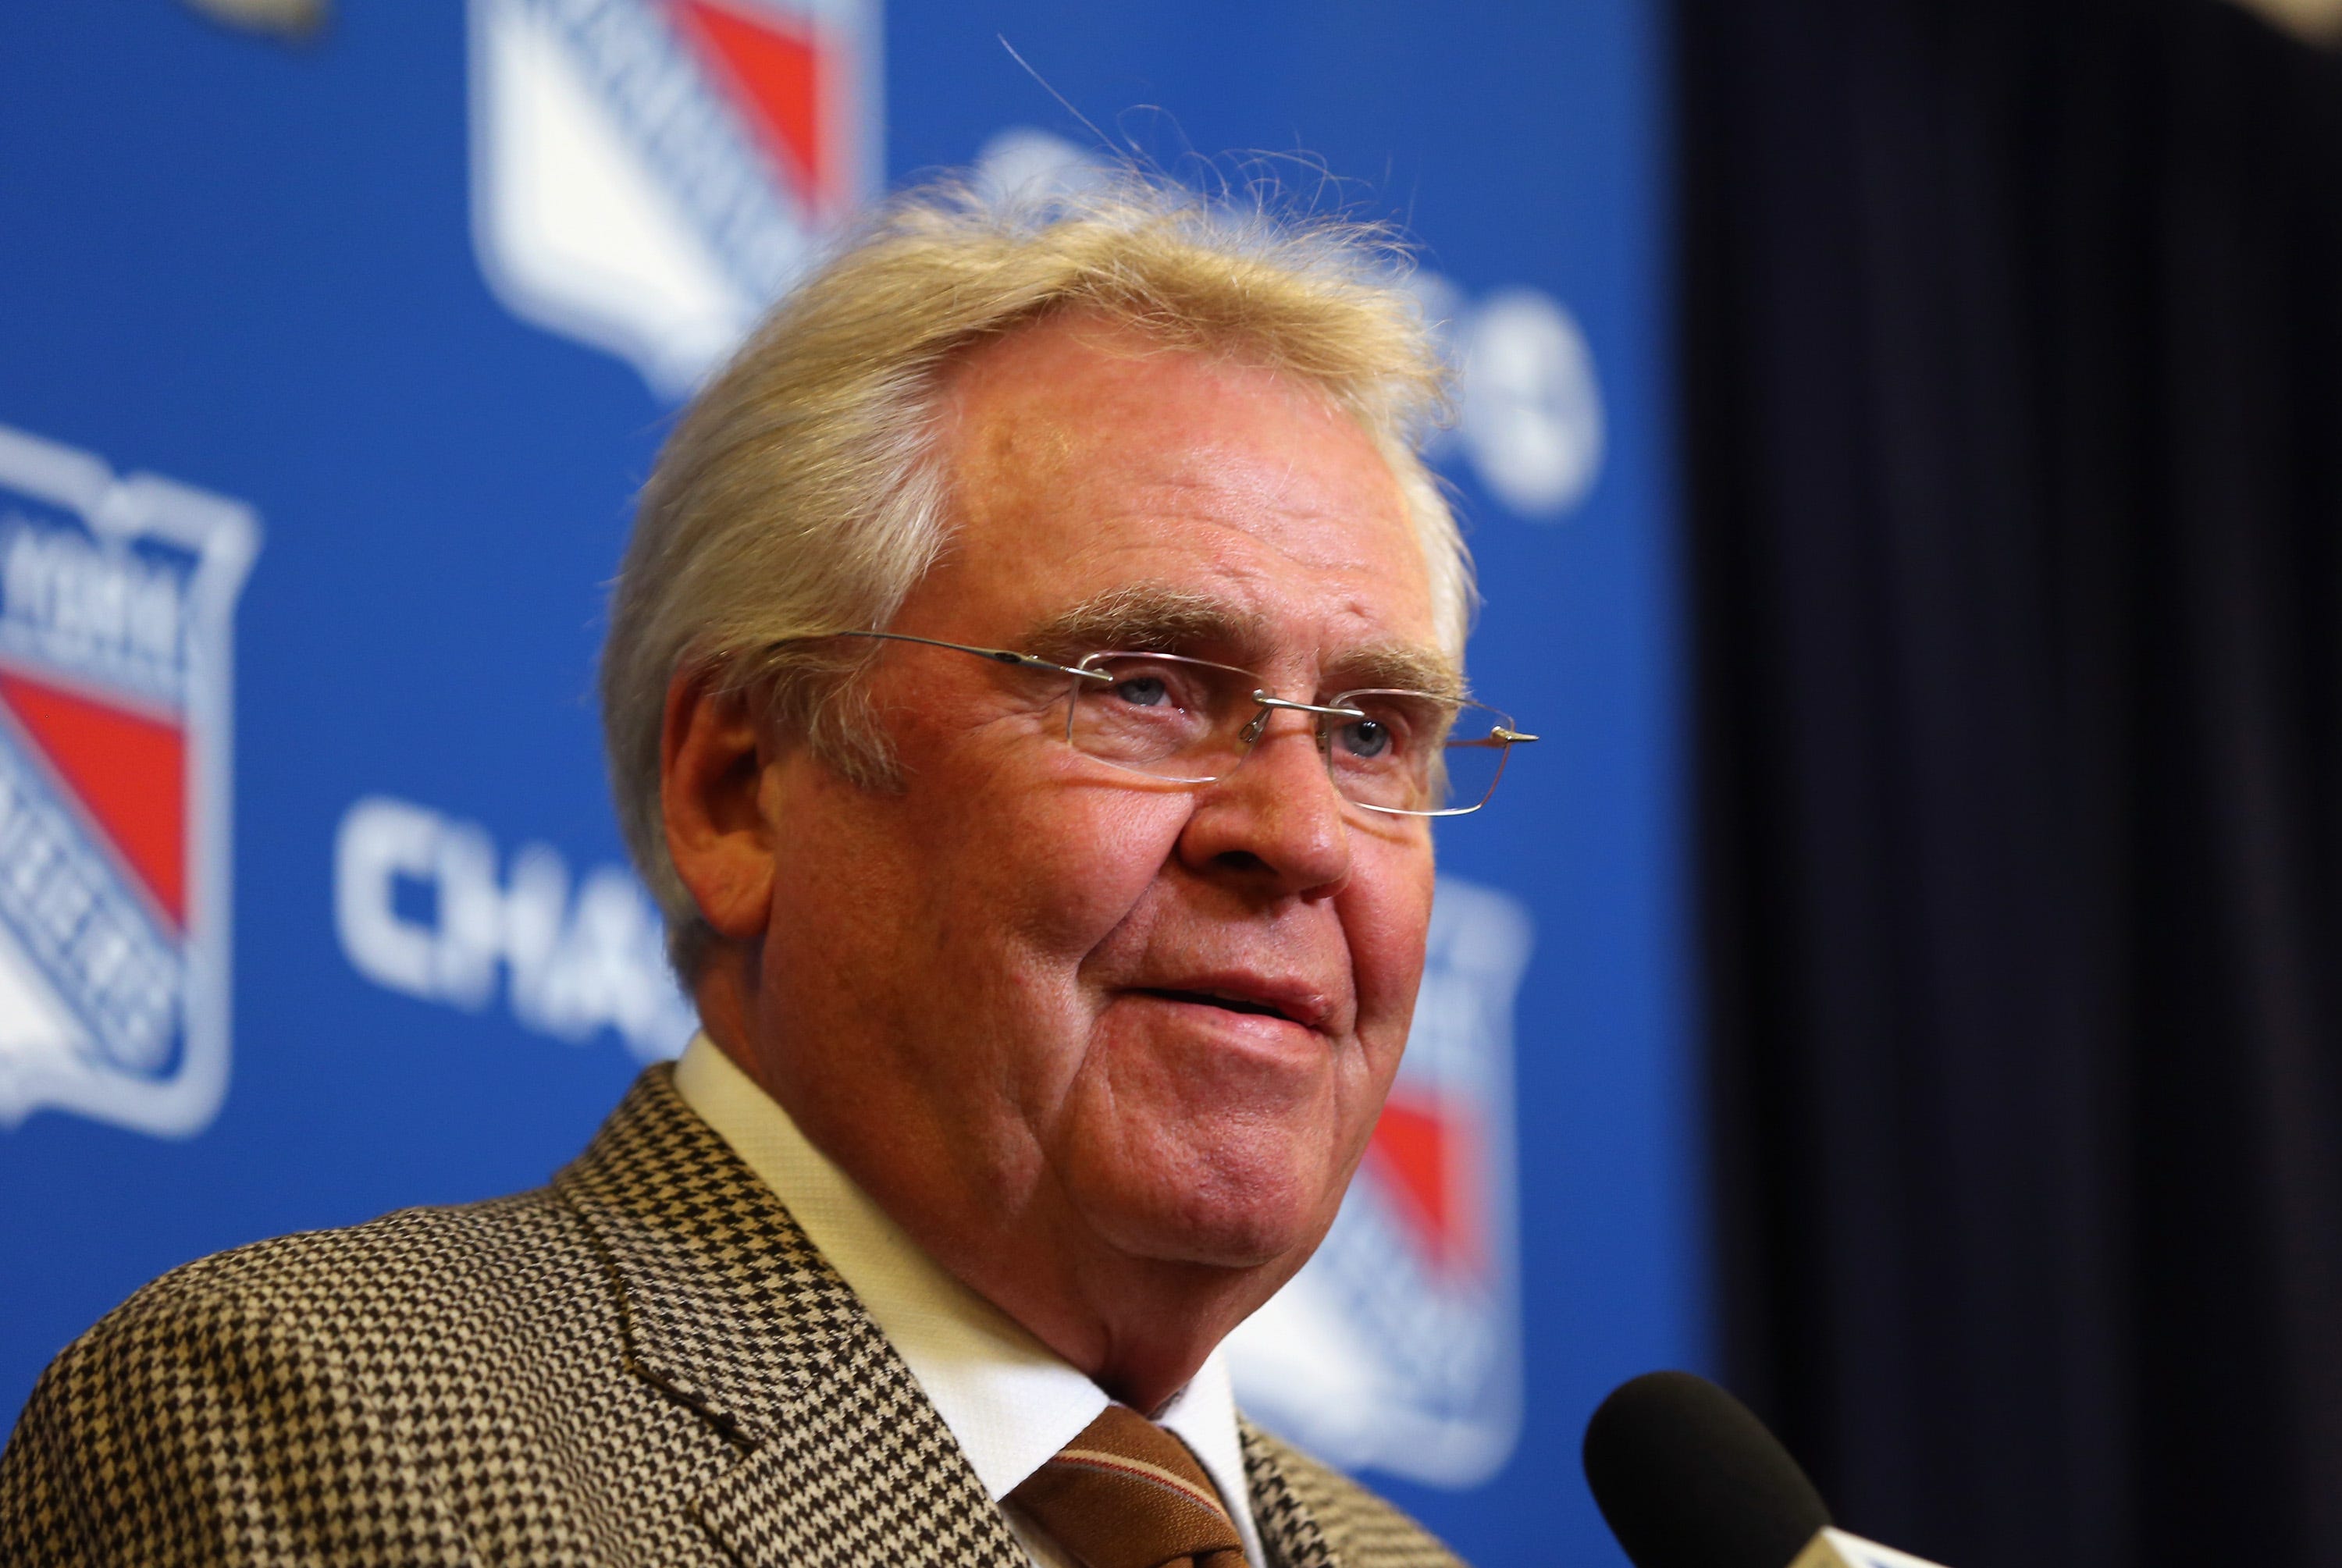 Hall of Fame executive Glen Sather steps down as Rangers president